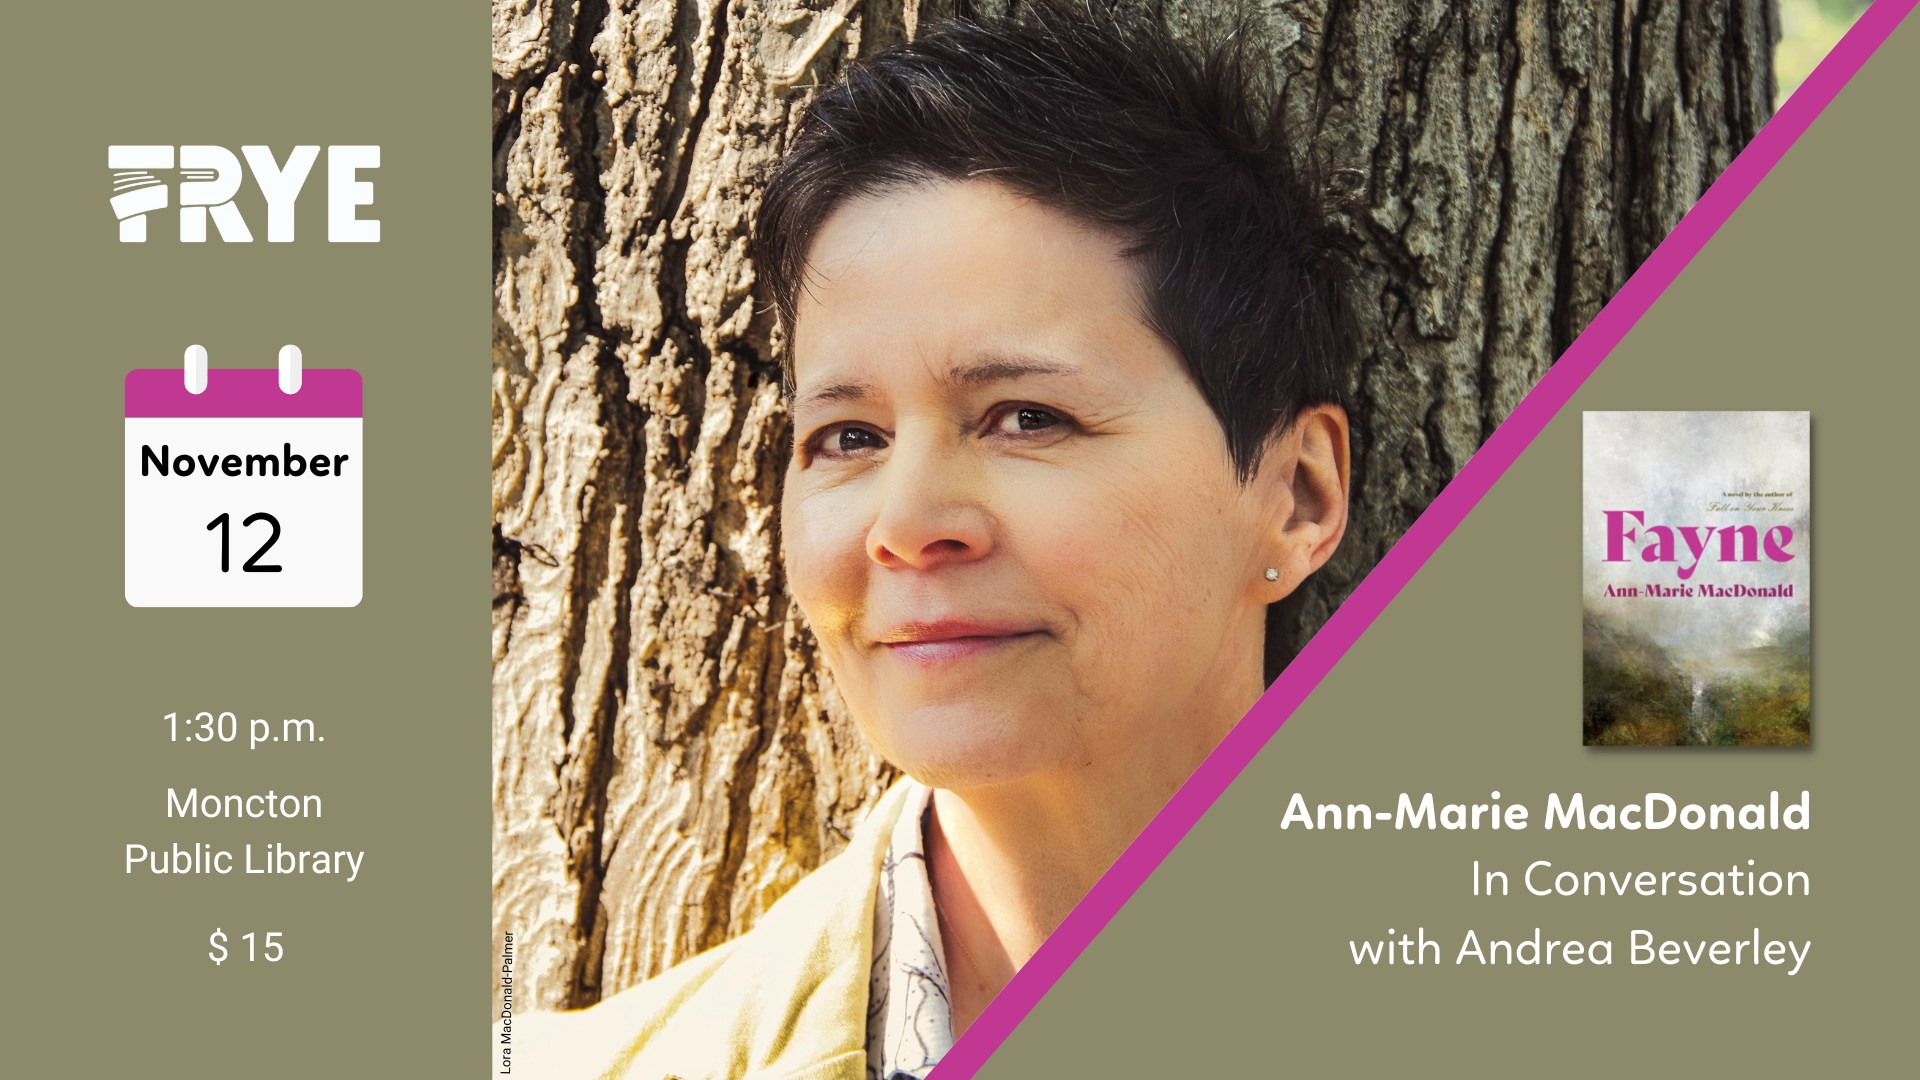 Headshot of Ann-Marie MacDonald. Text reads: Frye Festival. November 12, 2022. 1:30pm at the Moncton Public Library. $15. Ann-Marie MacDonald in conversation with Andrea Beverley.